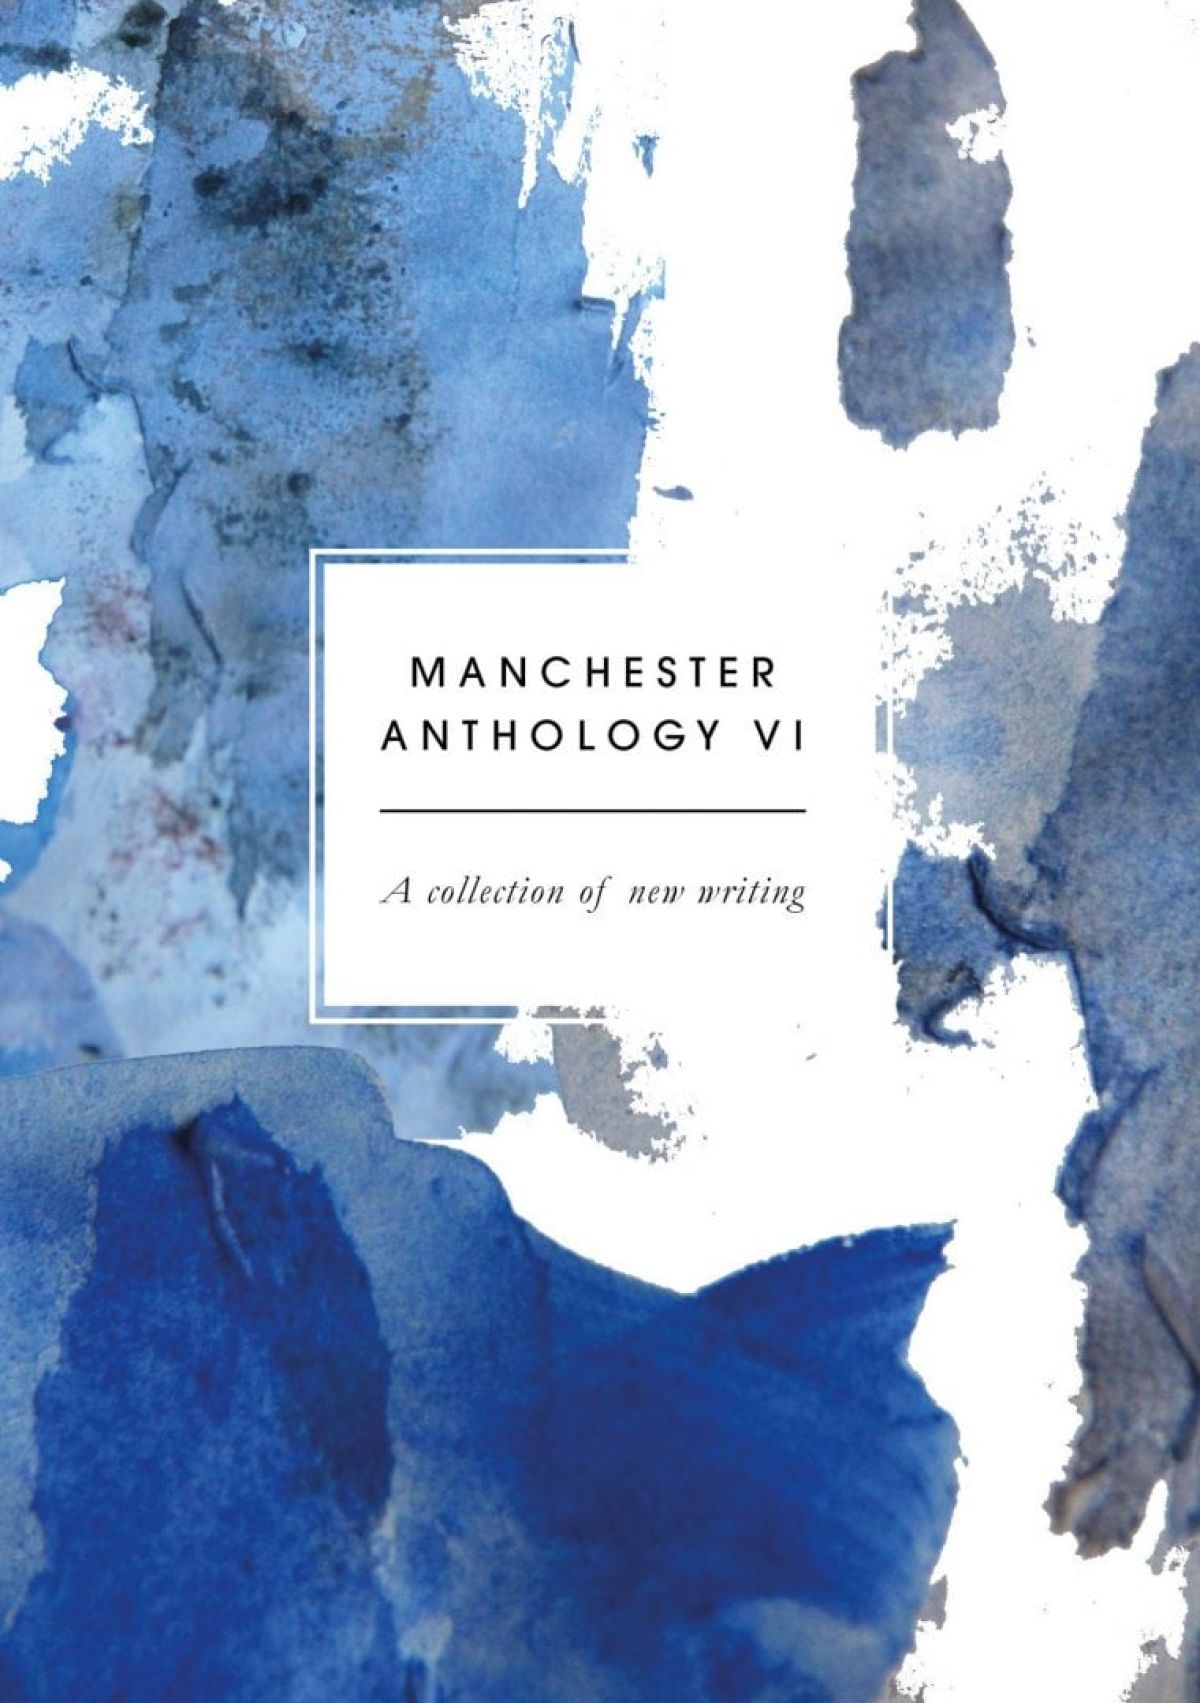 Review: The Manchester Anthology VI